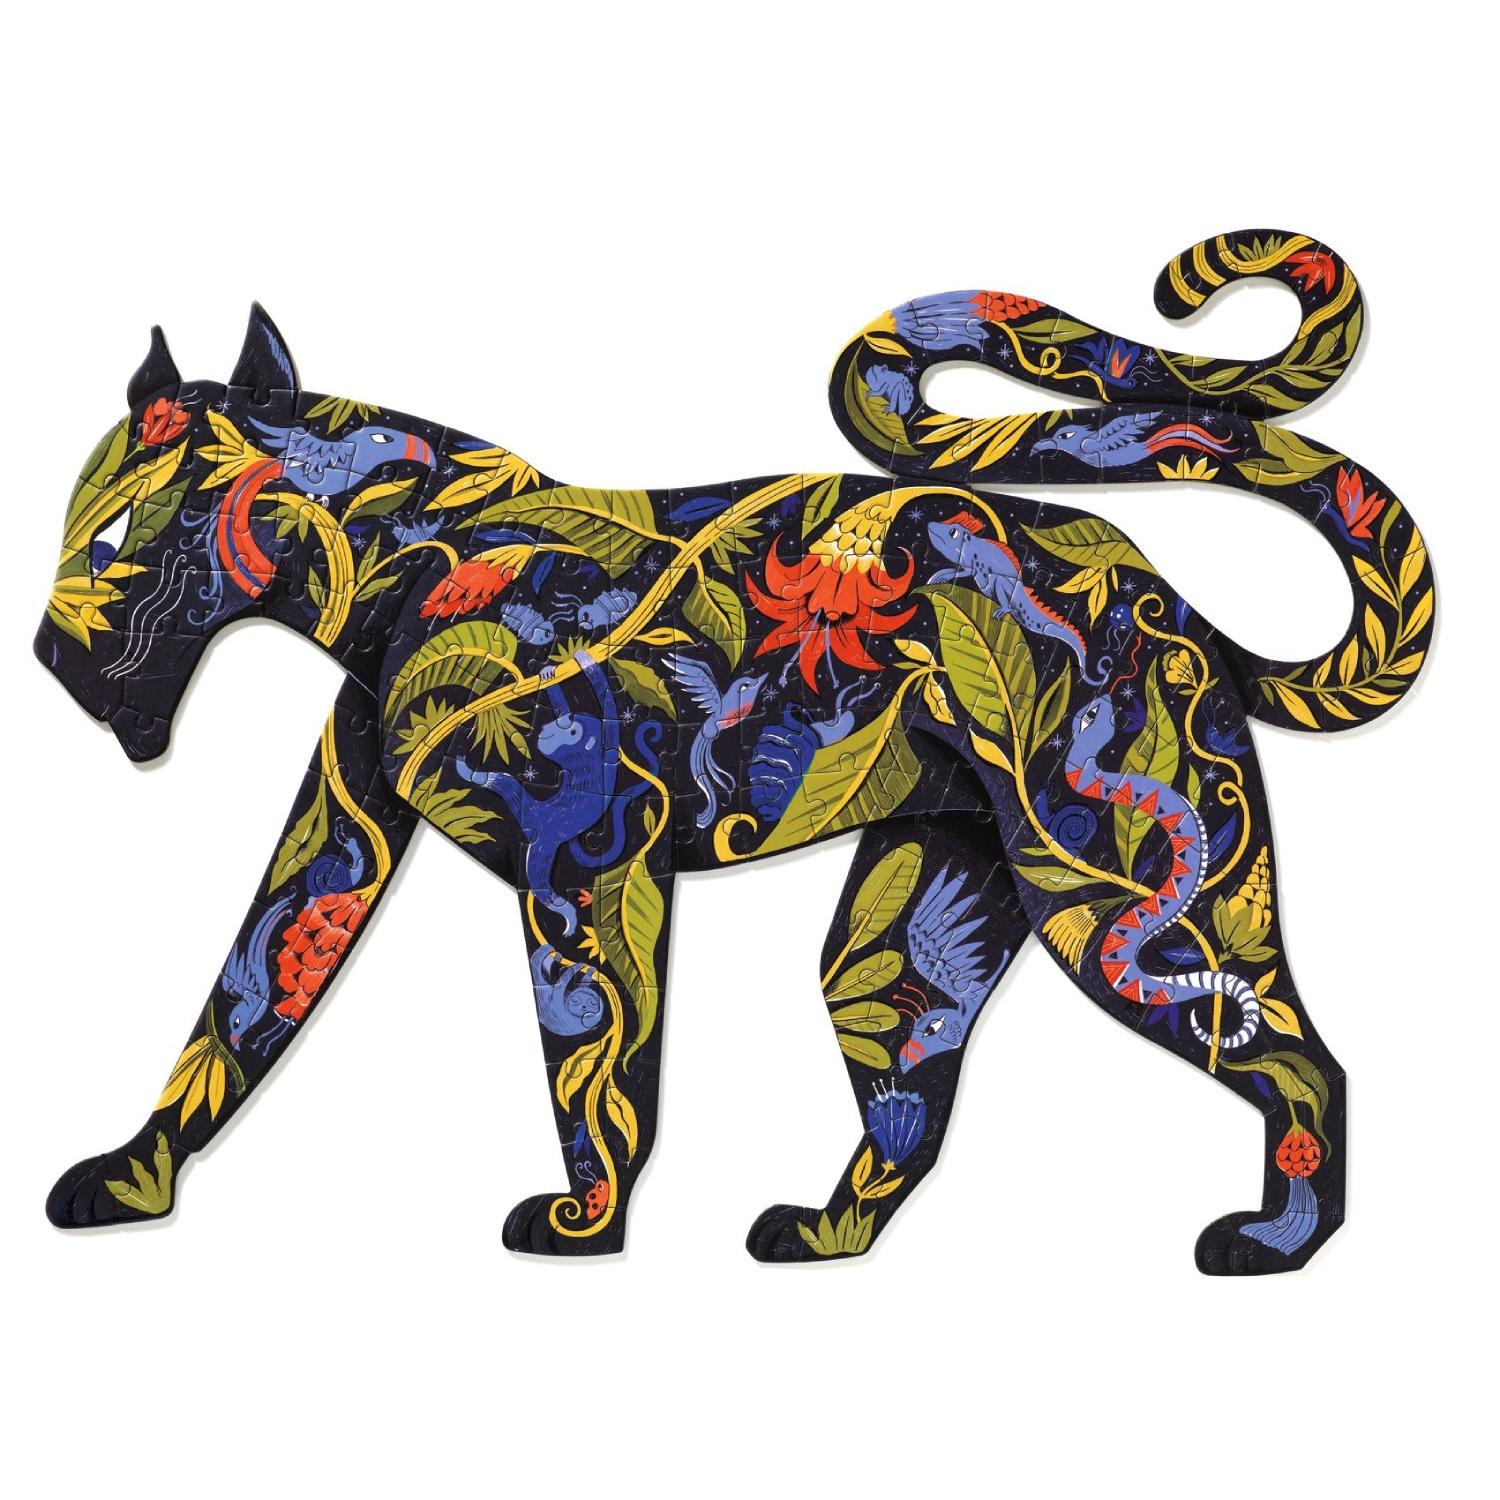 puzz'art panther puzzle 150 pieces by Djeco